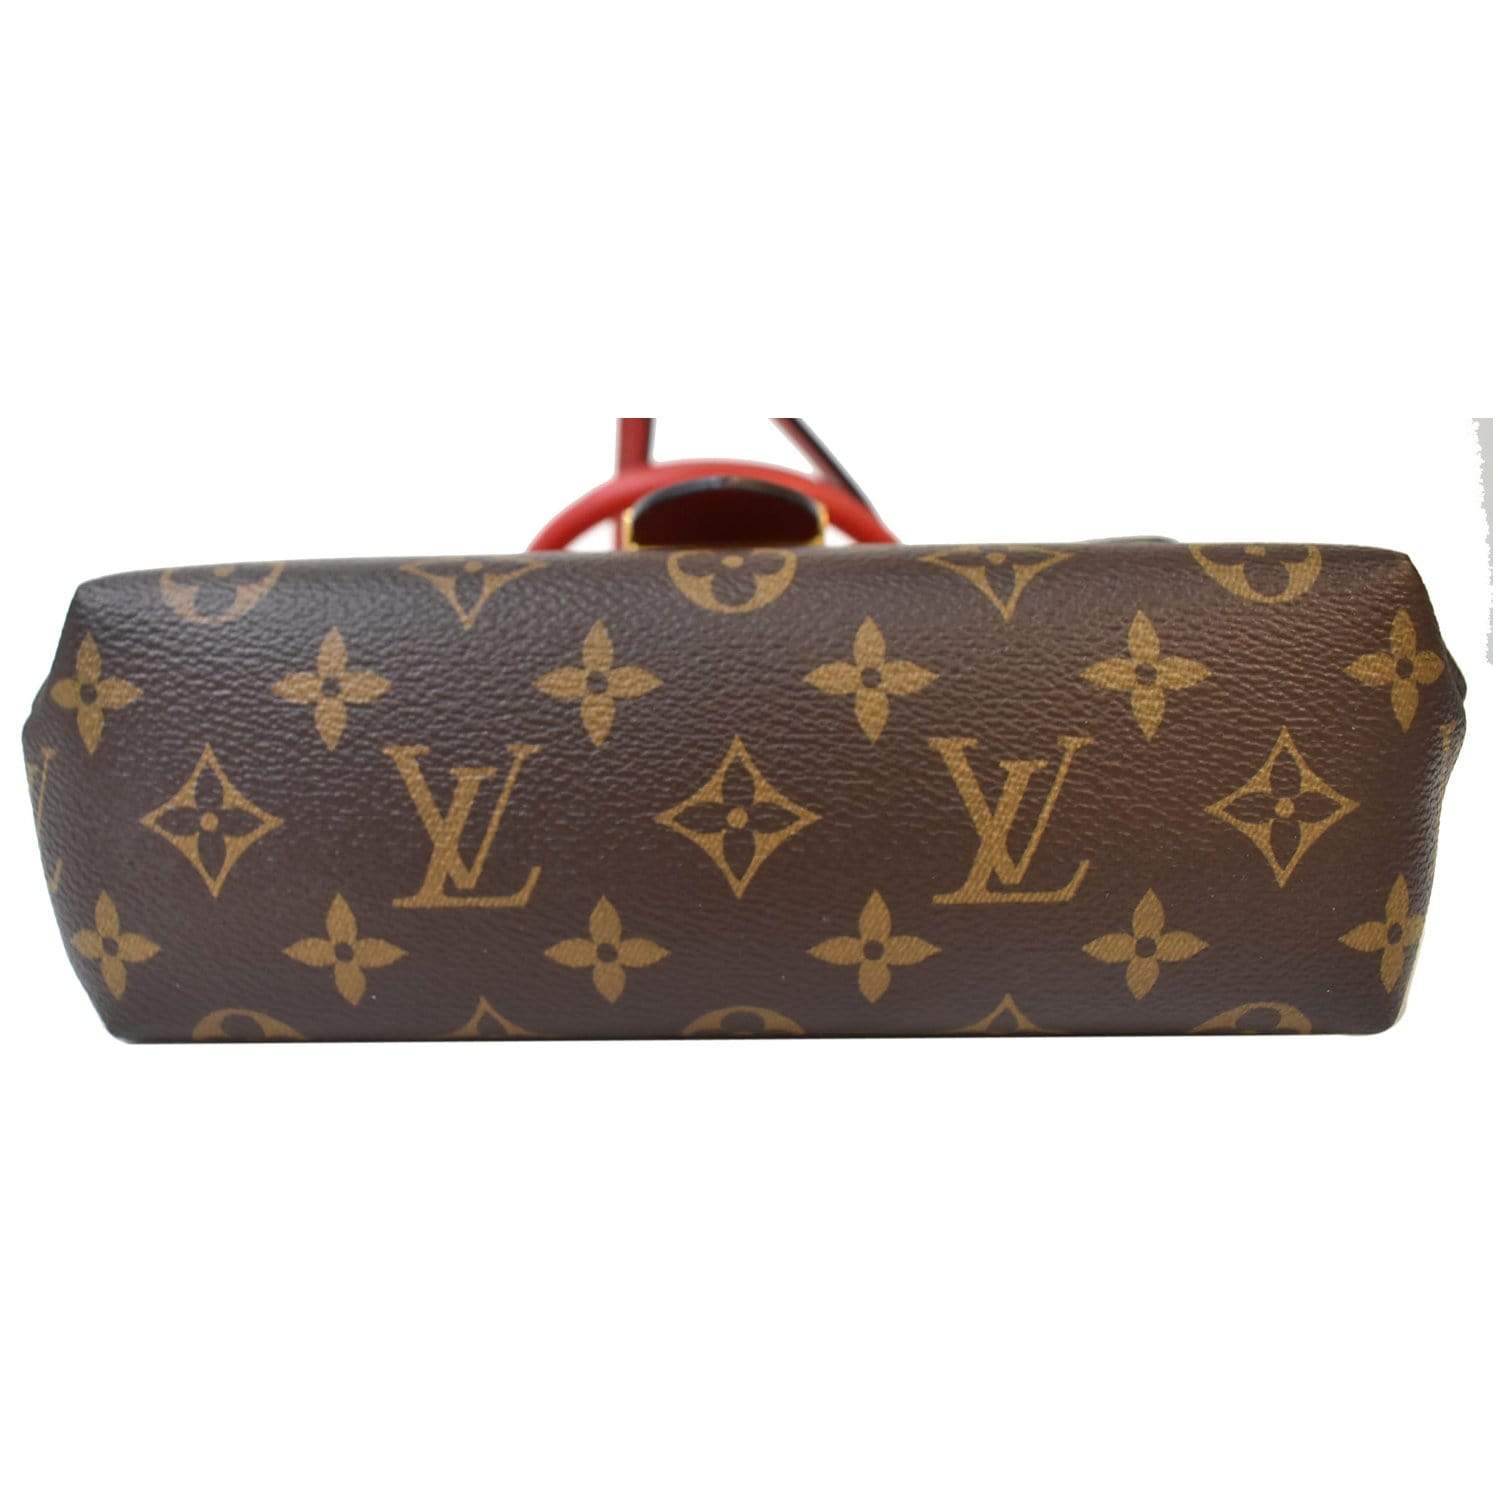 louis vuitton bag with red strap